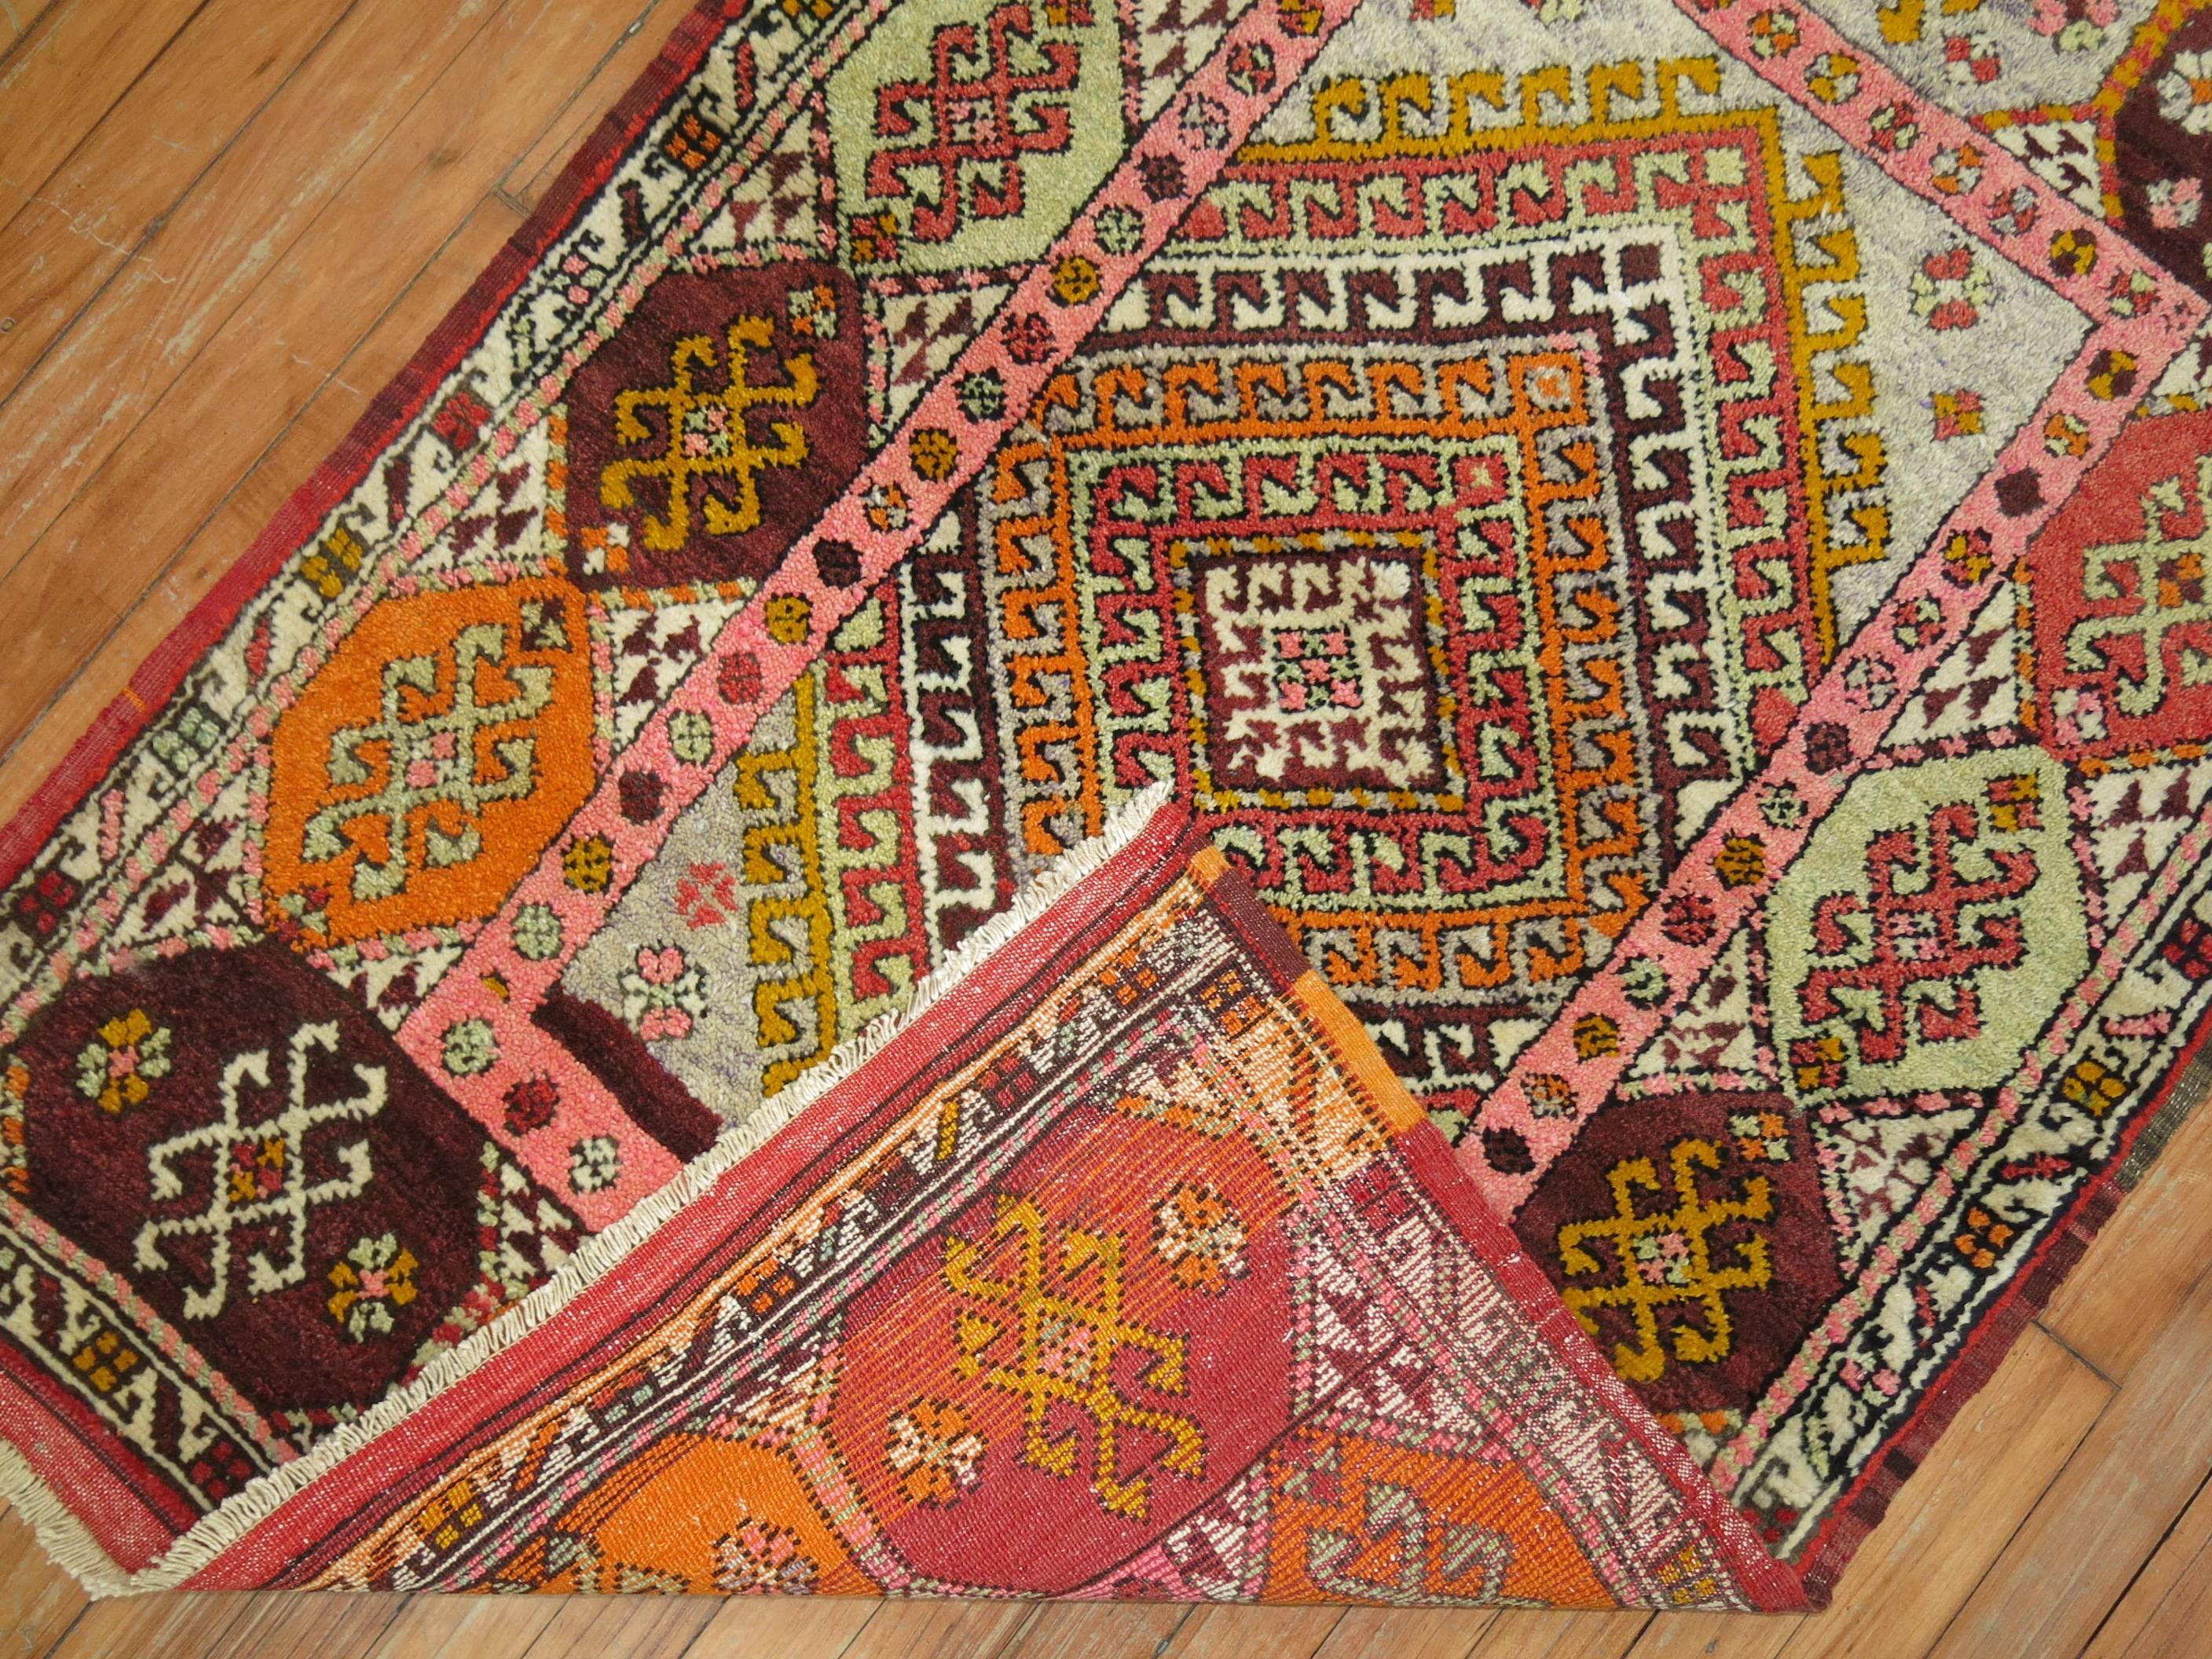 Colorful vintage Turkish Konya rug from the mid-20th century.